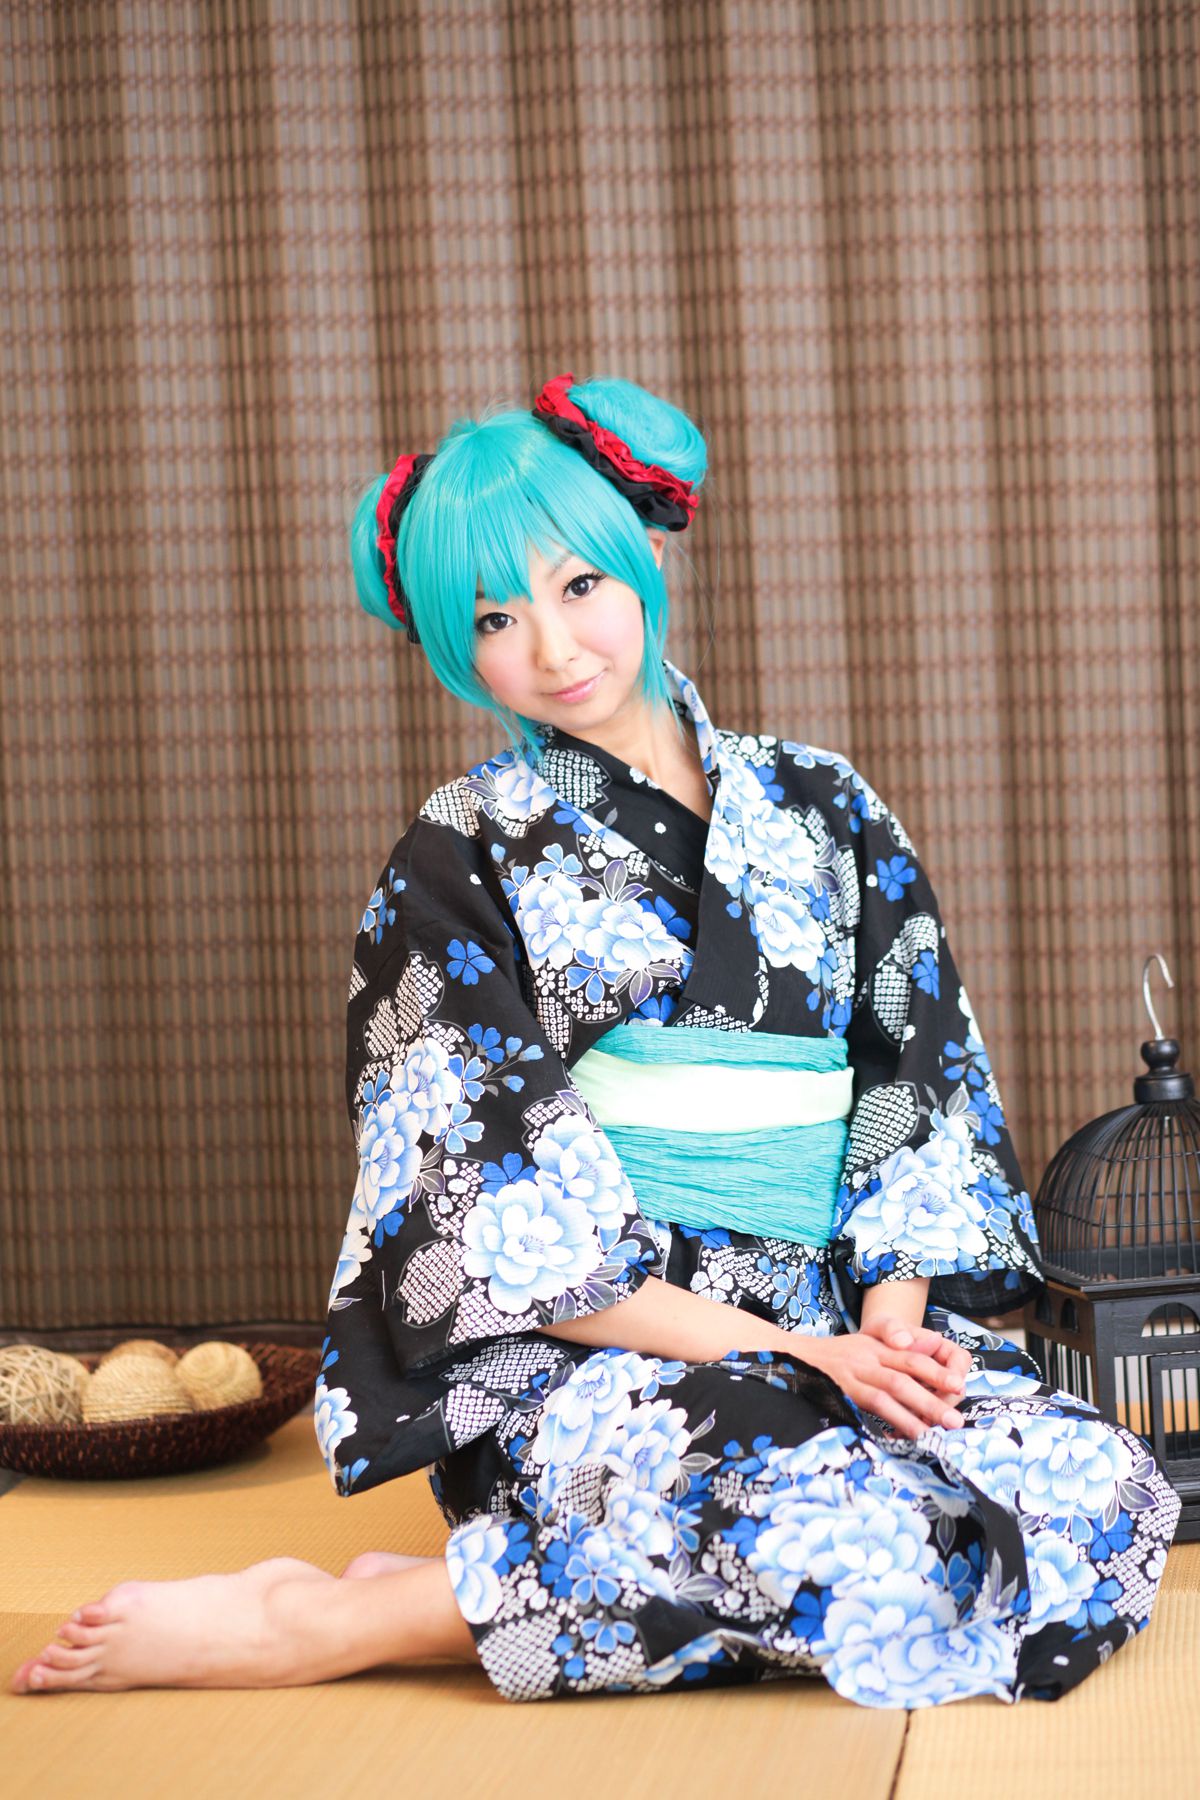 taotuhome[Cosplay] Necoco as Hatsune Miku from Vocaloid 套图第100张